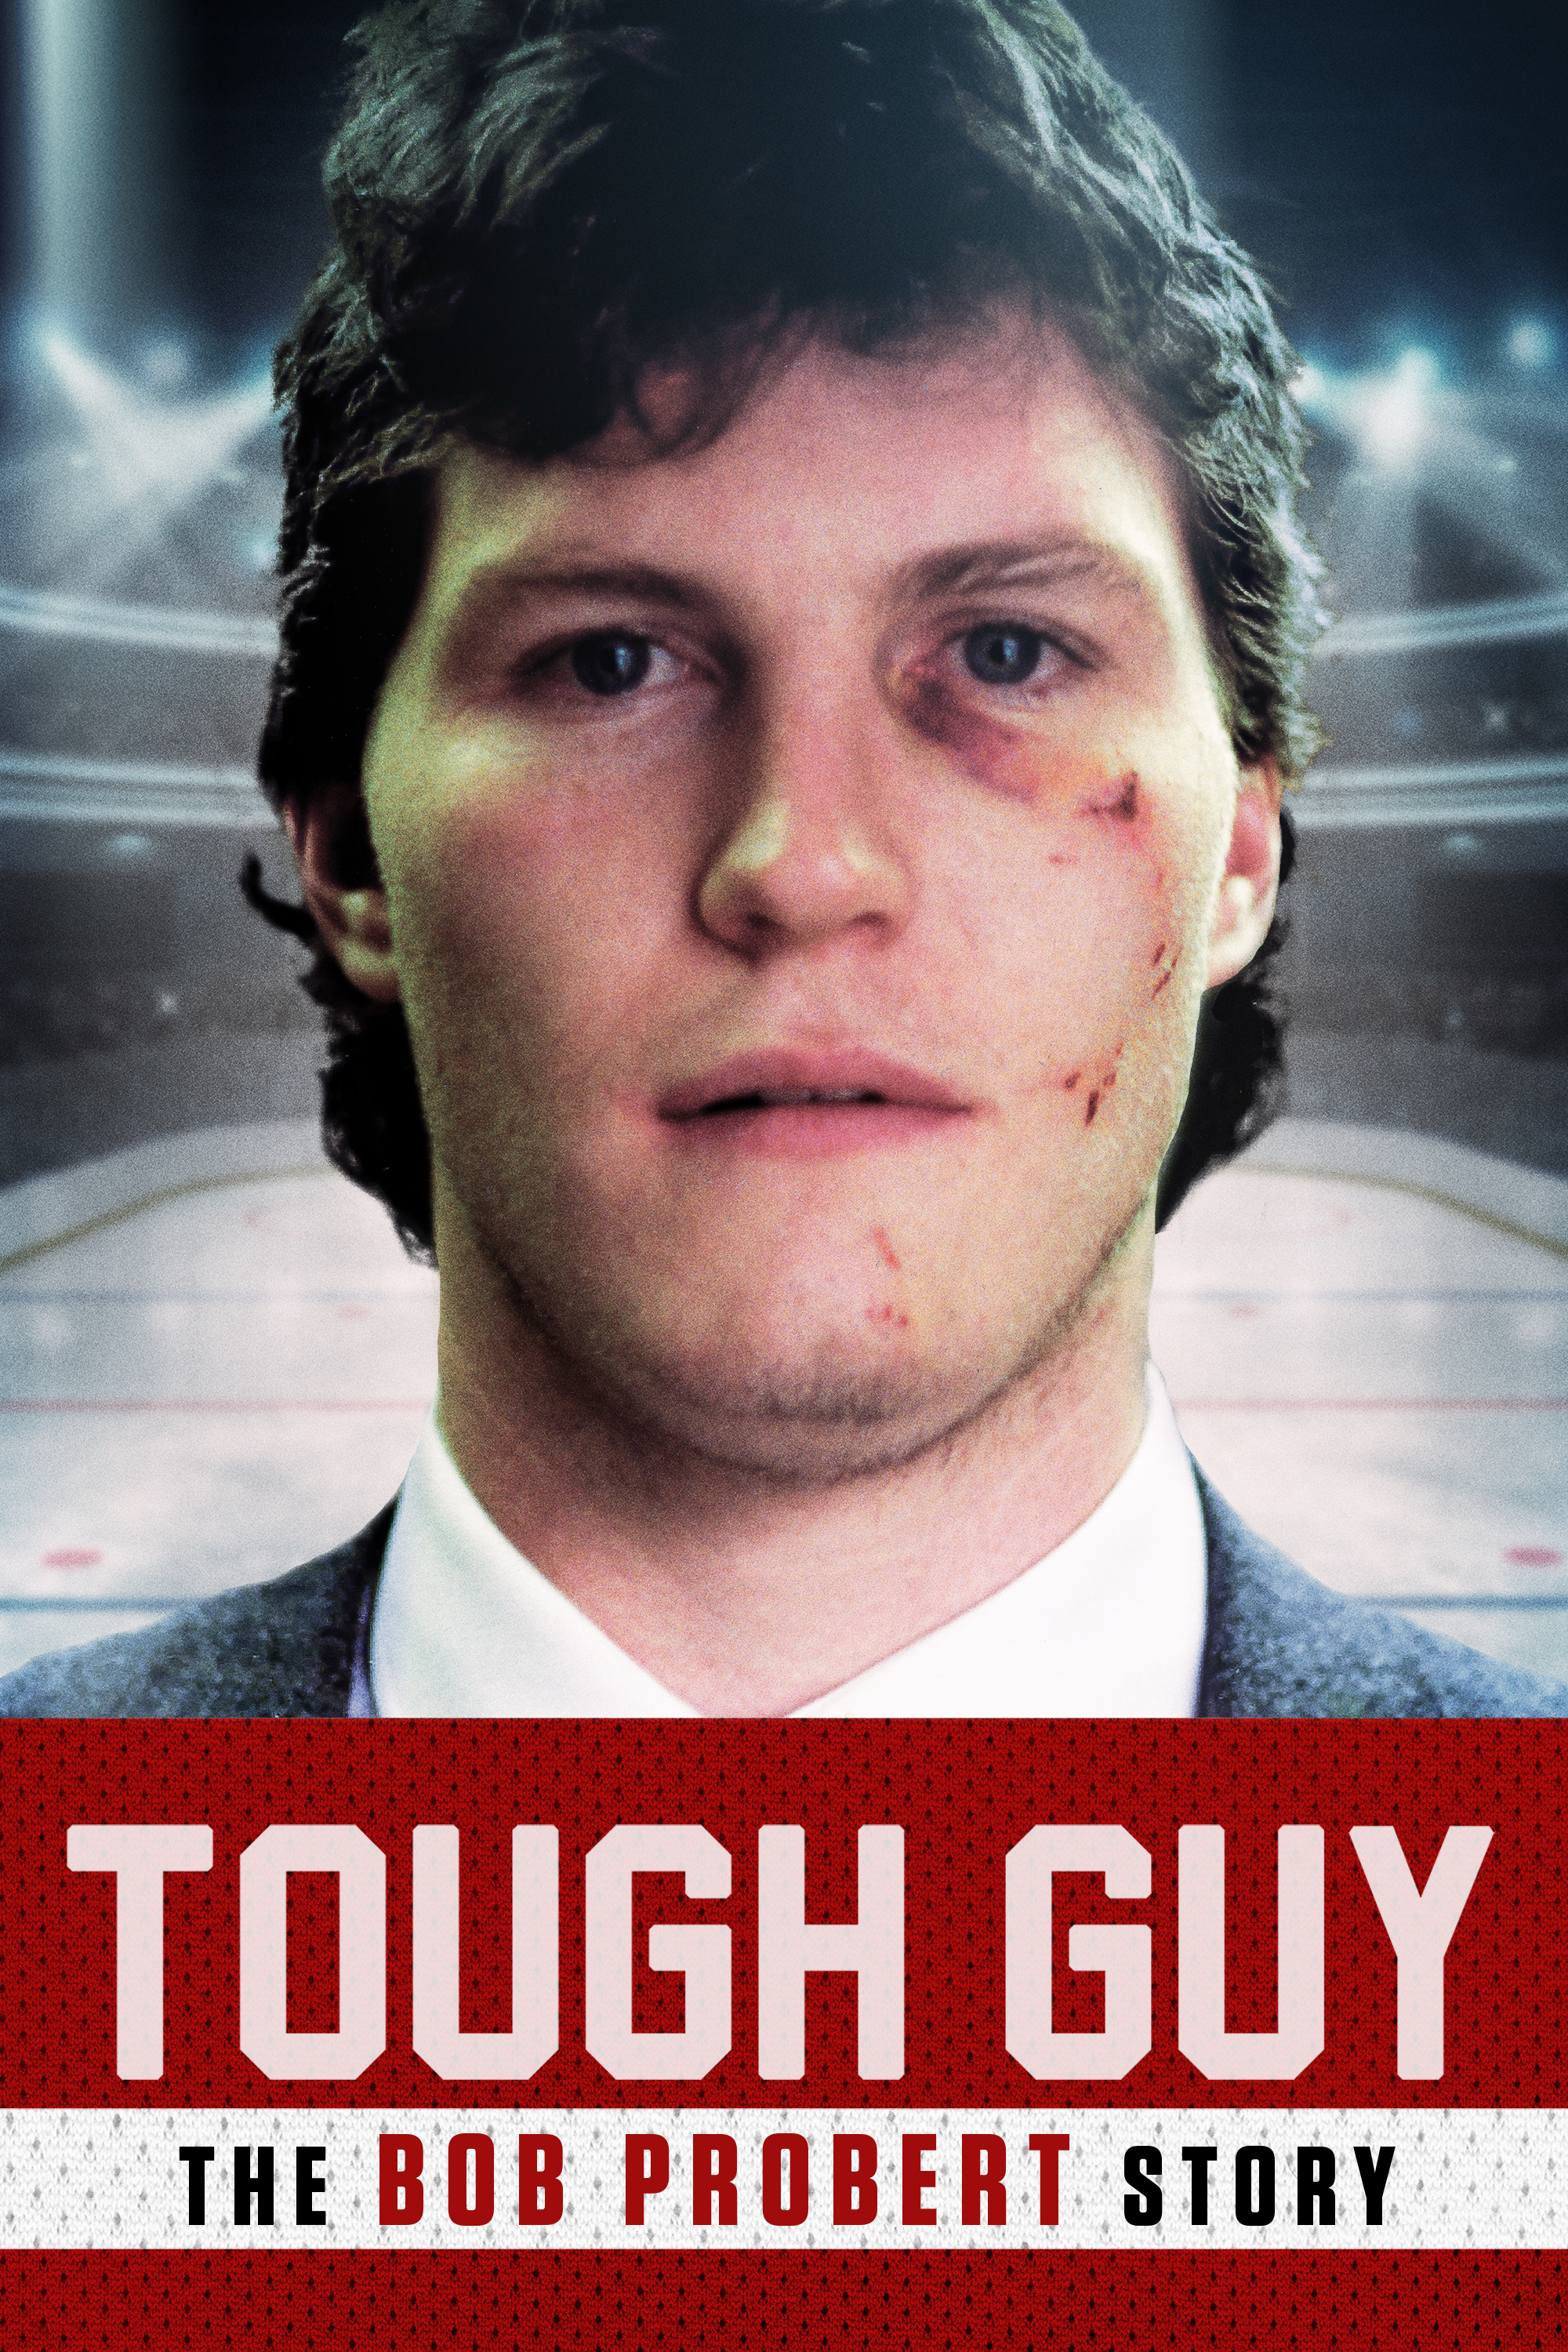 Bob Probert claimed this was the toughest guy he fought, and the